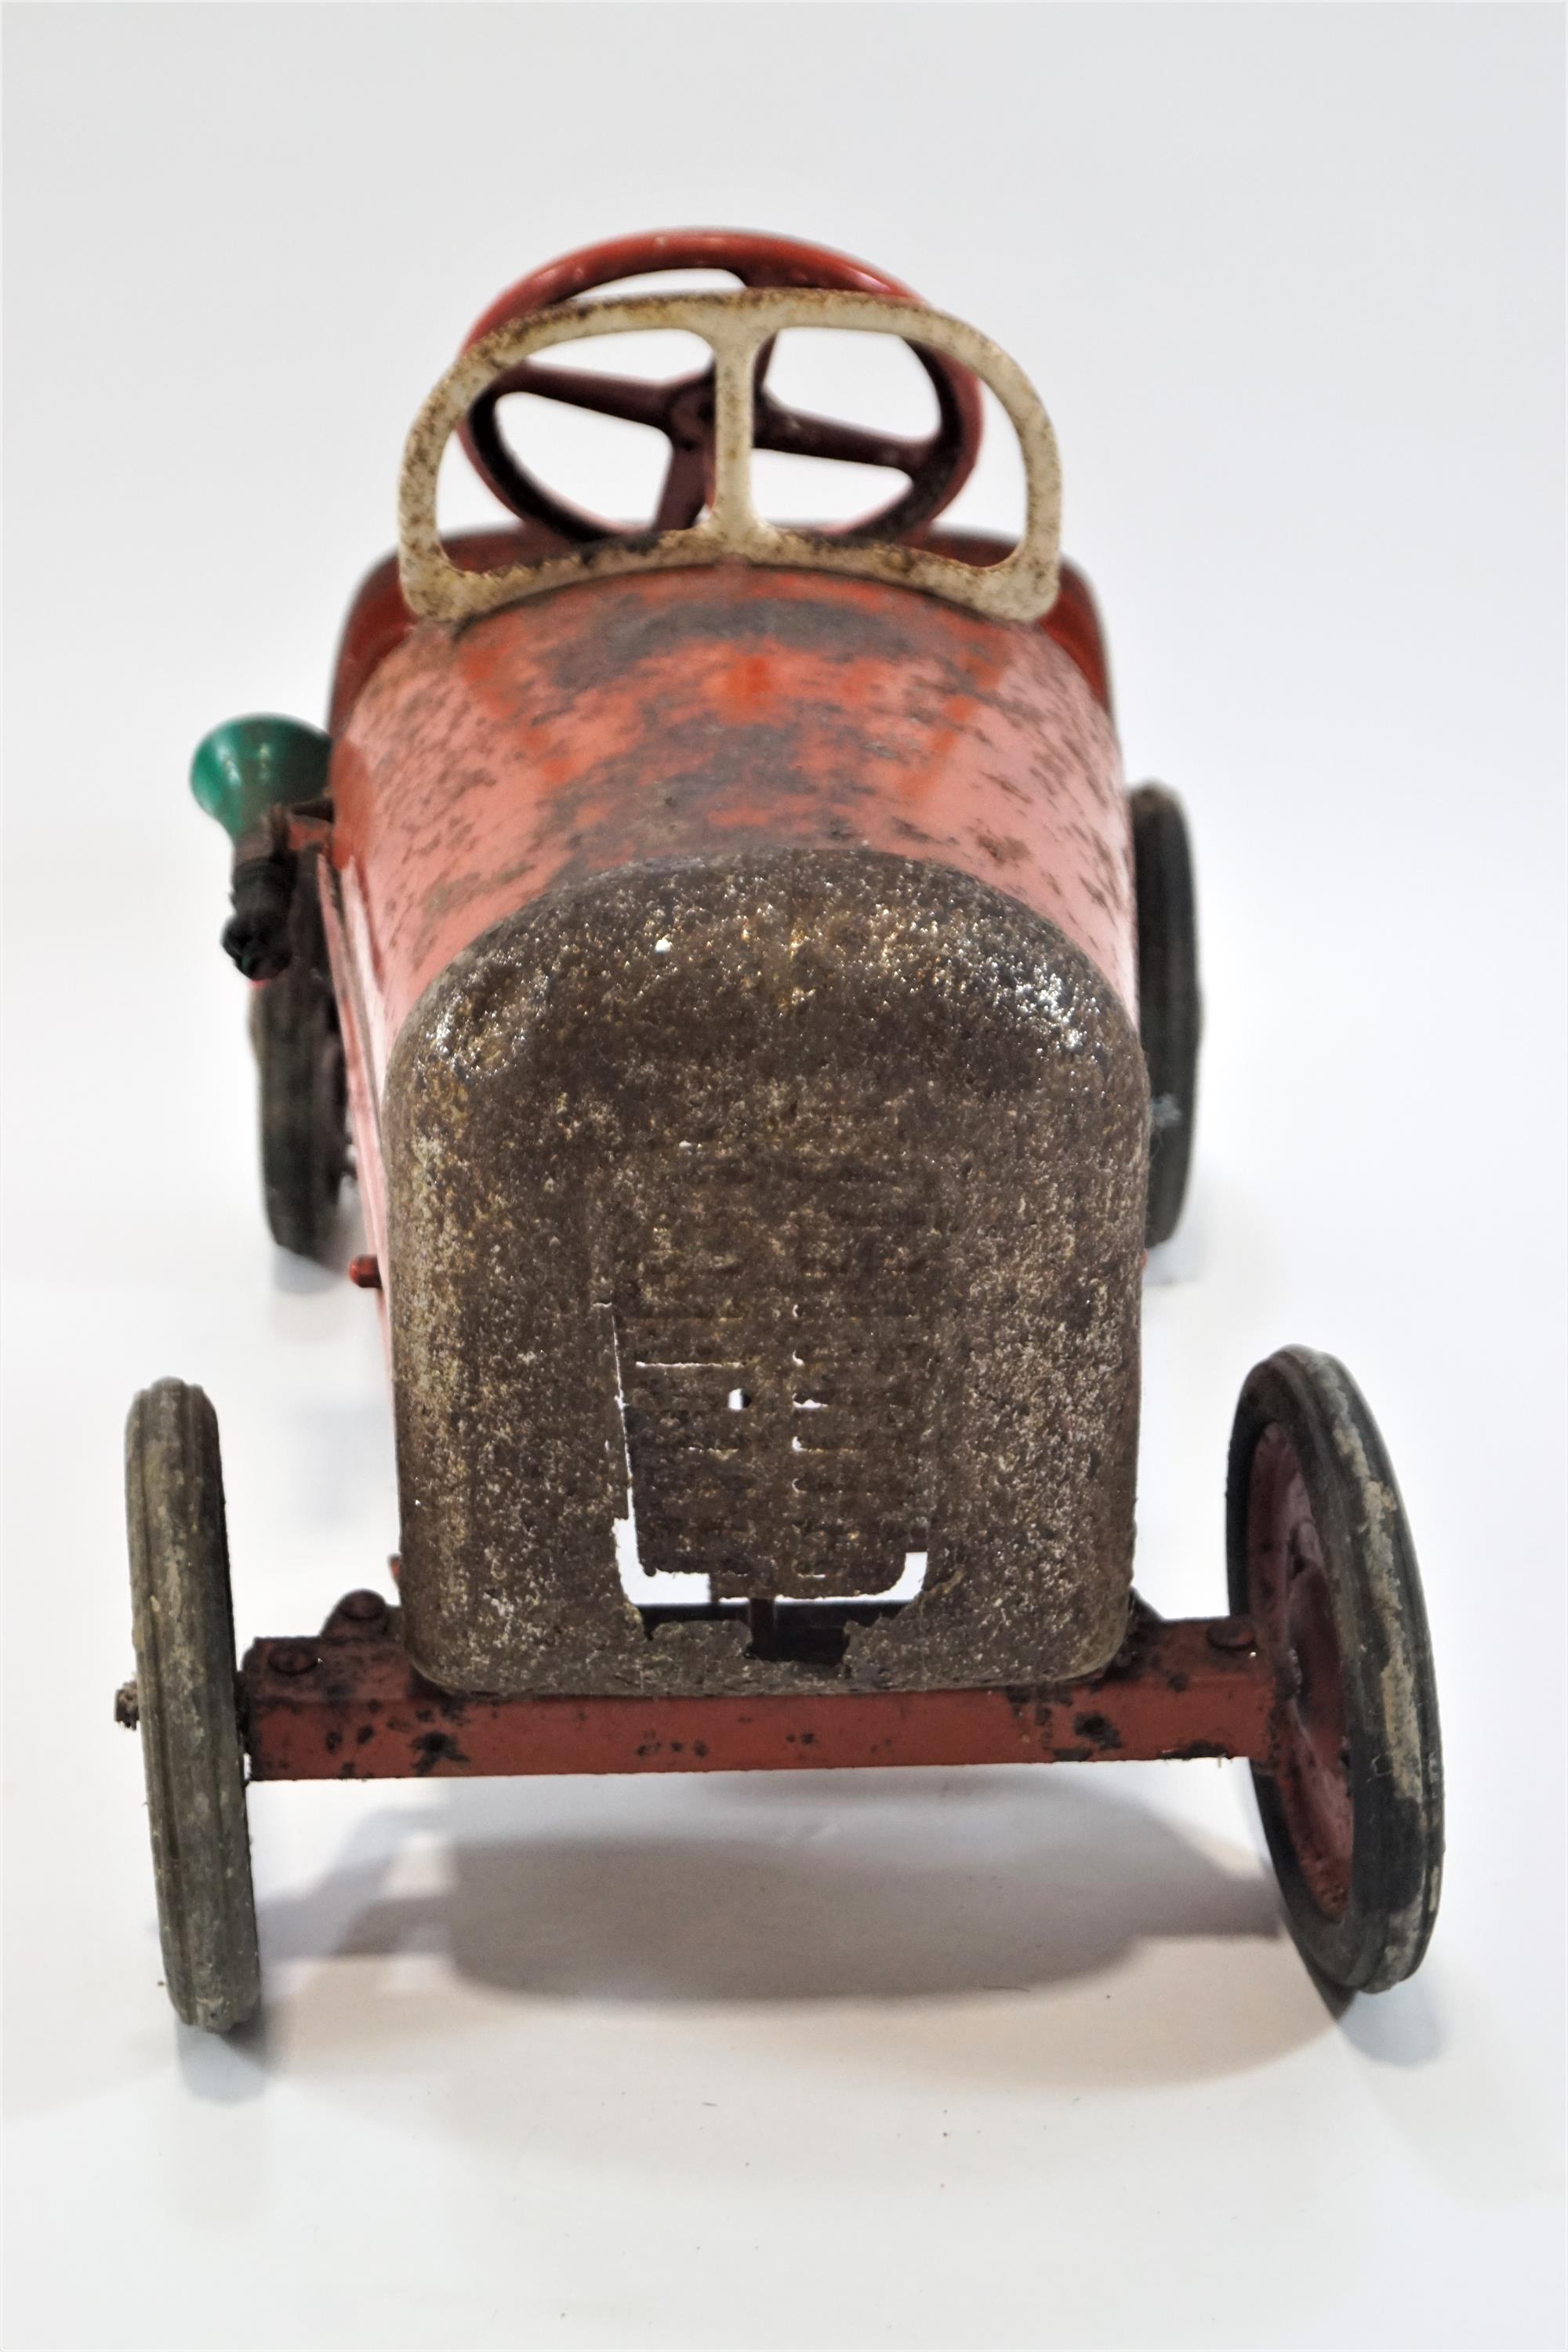 A child's tin toy red finished pedal car, the 'Royal Prince', by Triang, - Image 2 of 2